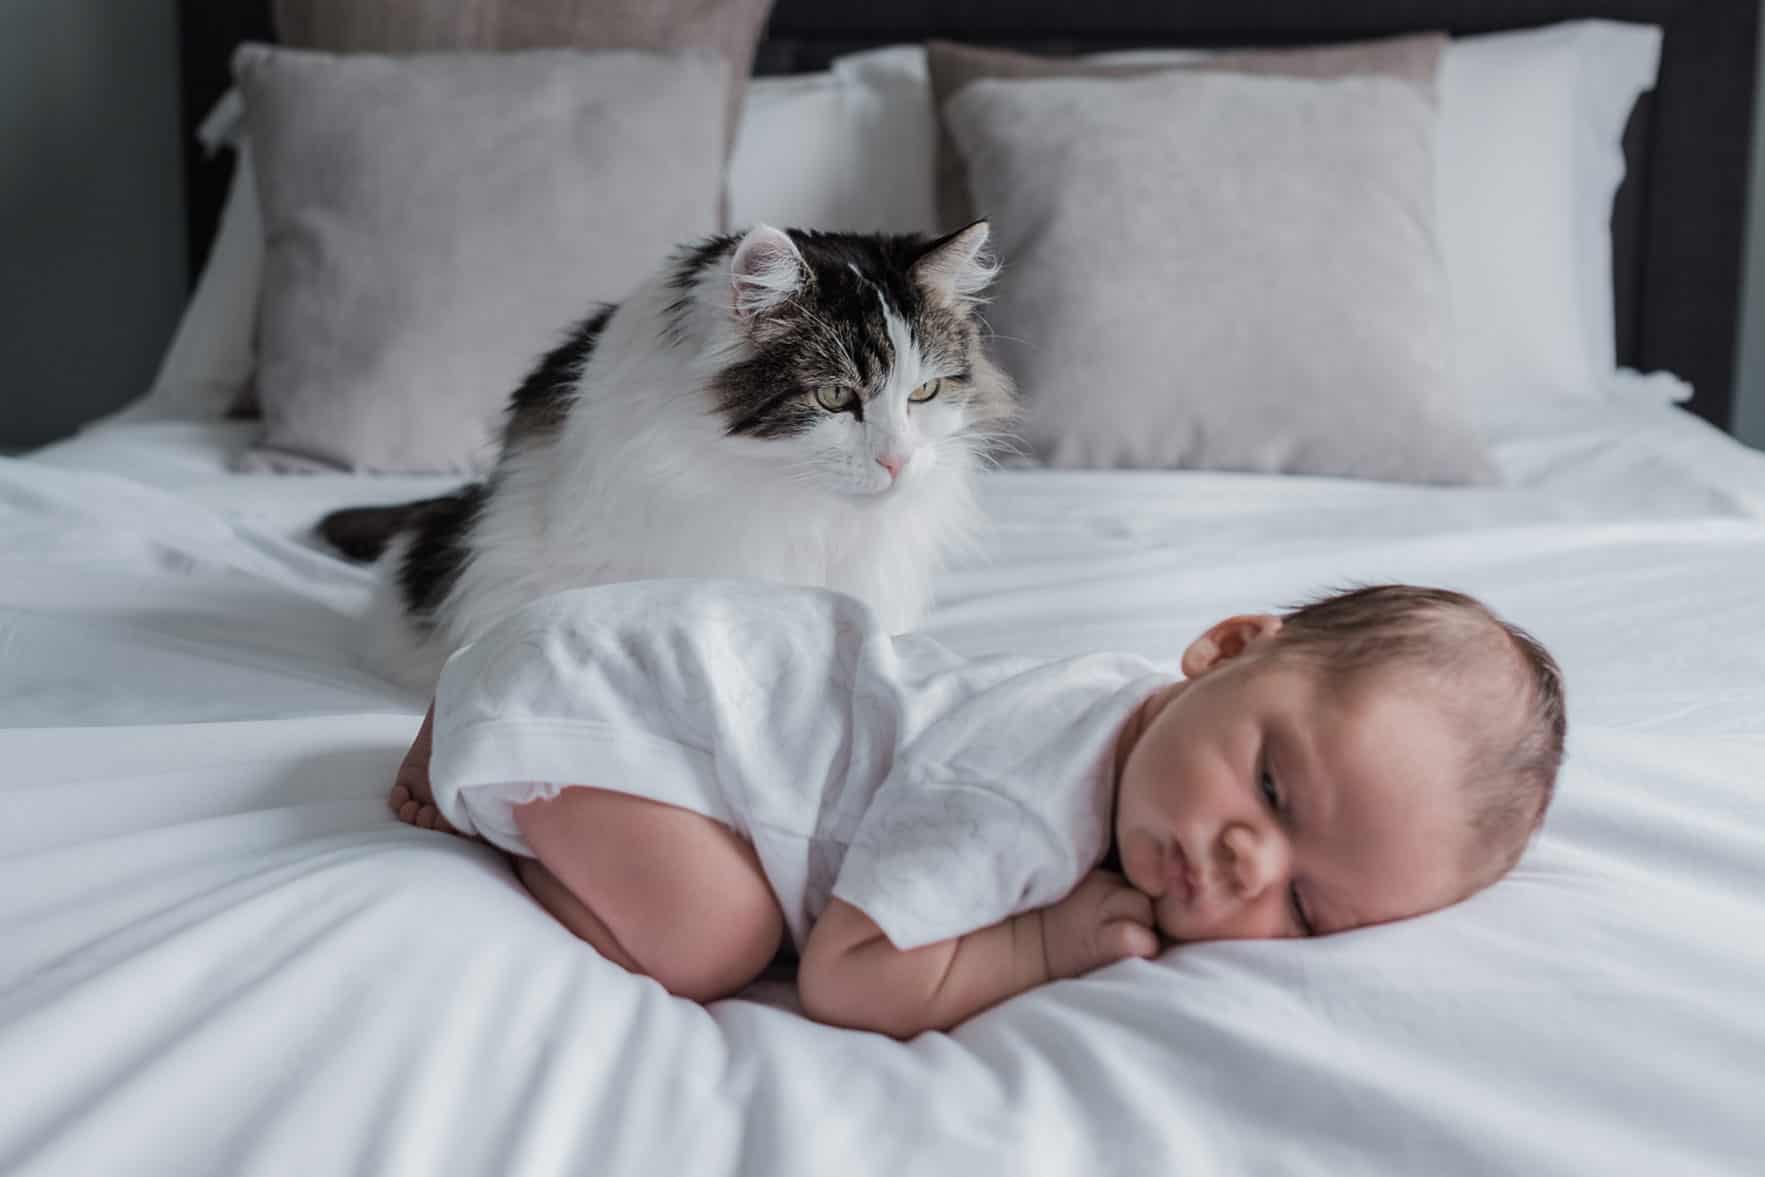 newborn-baby-and-cat-photos-at-home-001 26